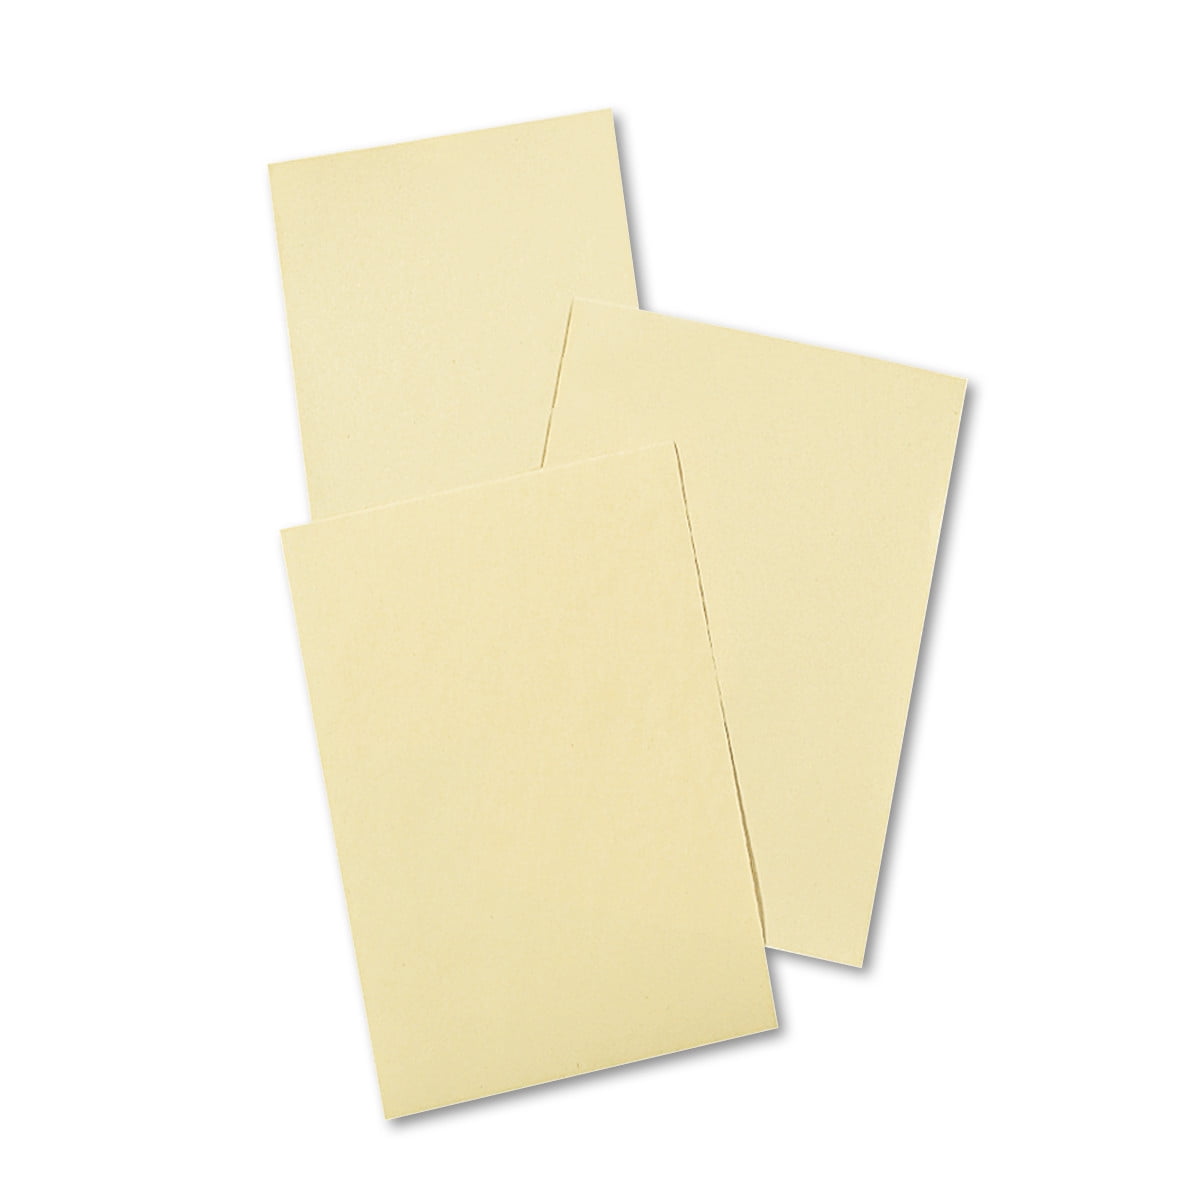 Pacon Drawing Paper, White, Heavyweight, 18 x 24, 500 Sheets